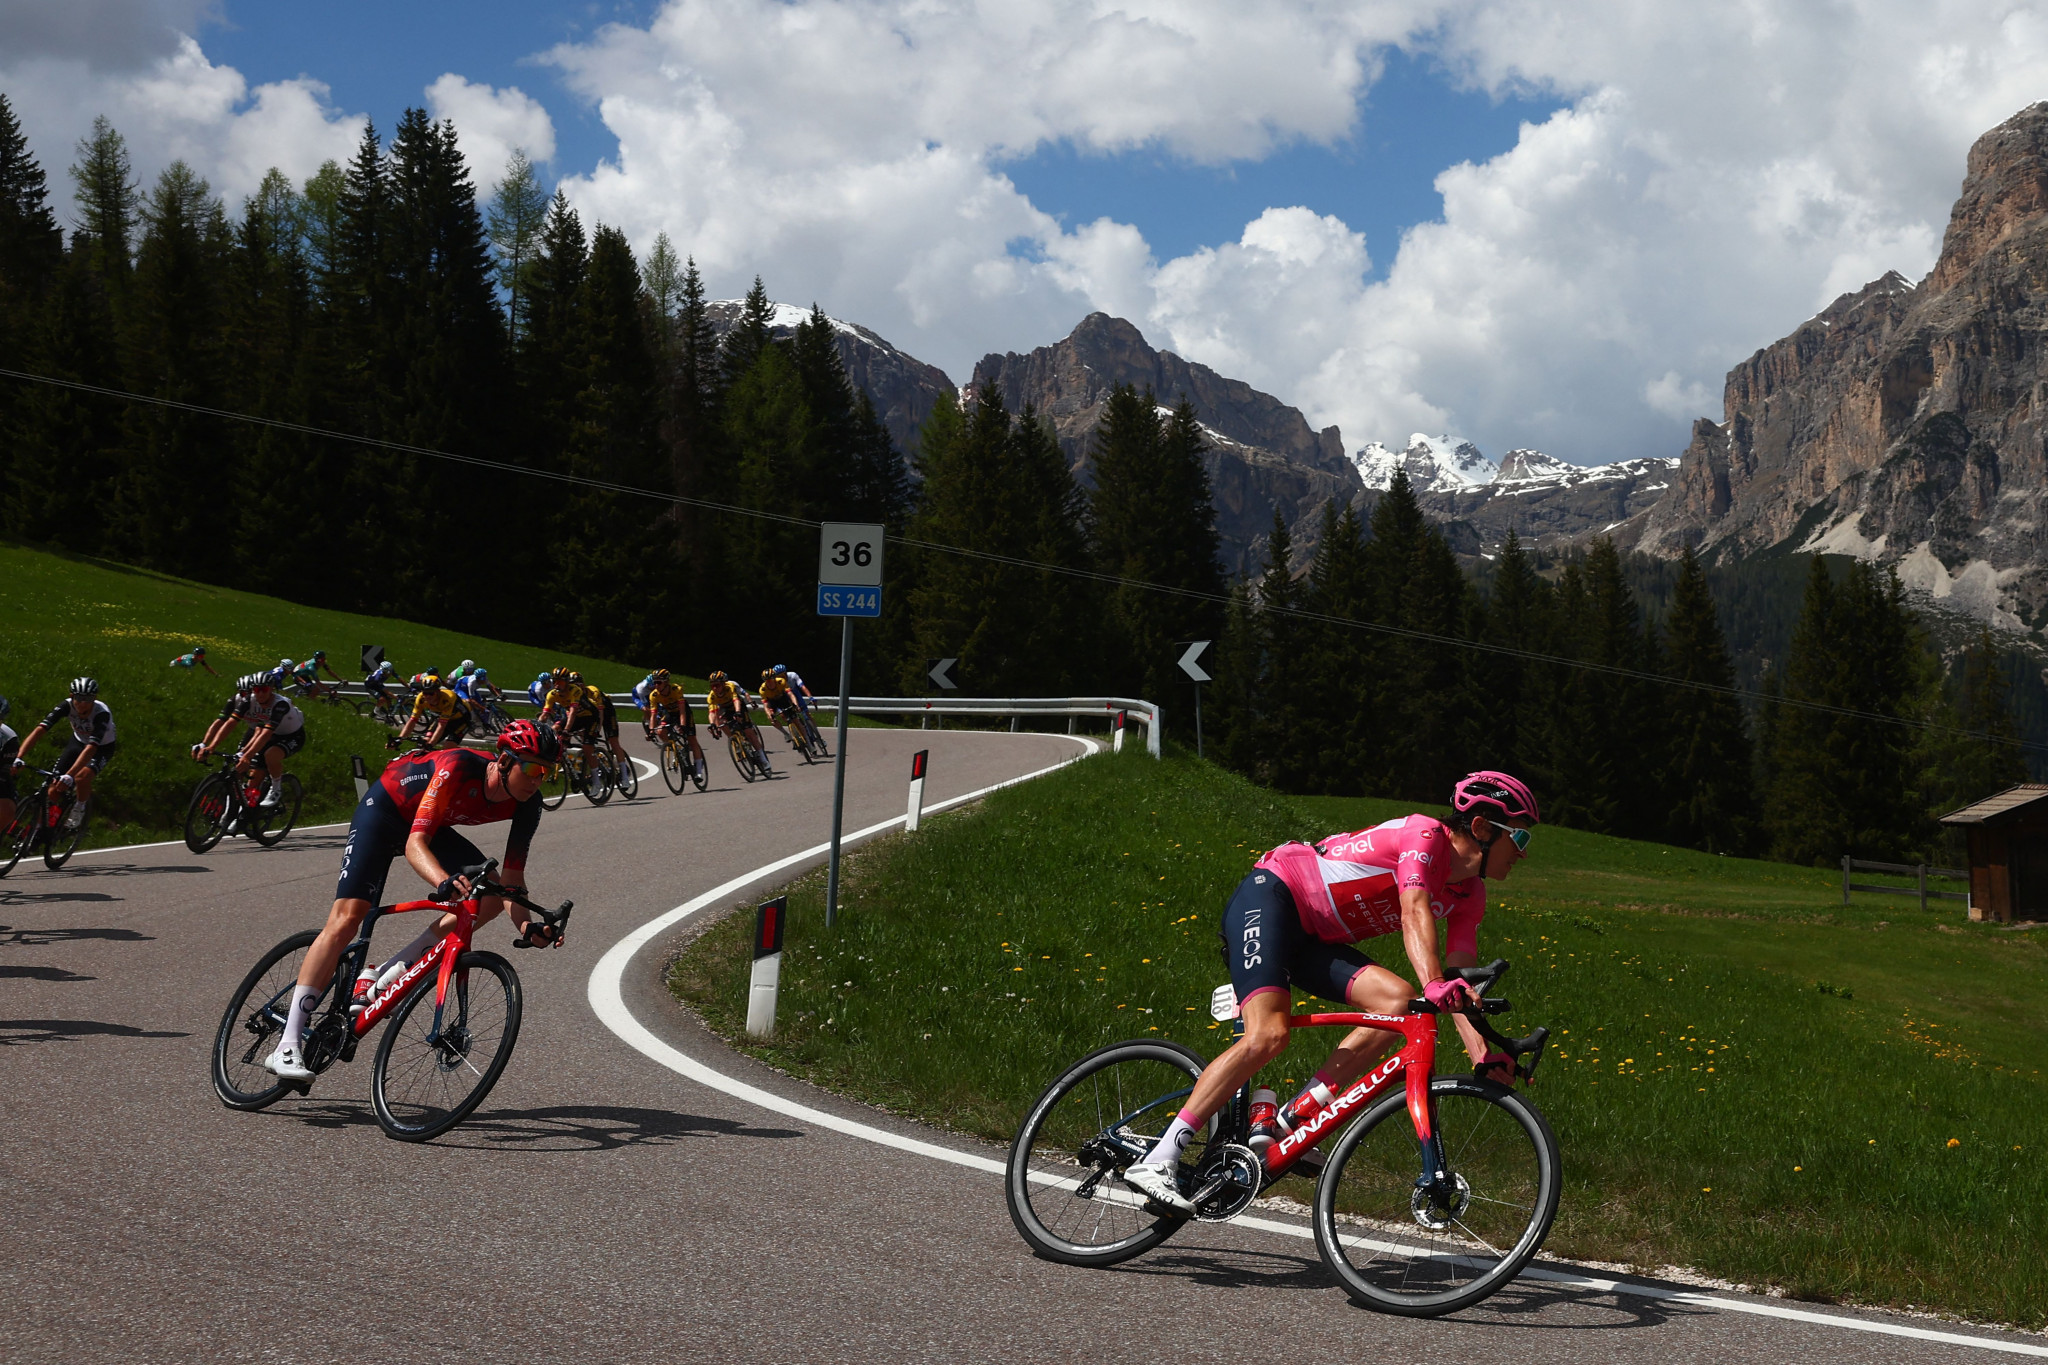 Thomas closes in on Giro d'Italia triumph after Buitrago stage win